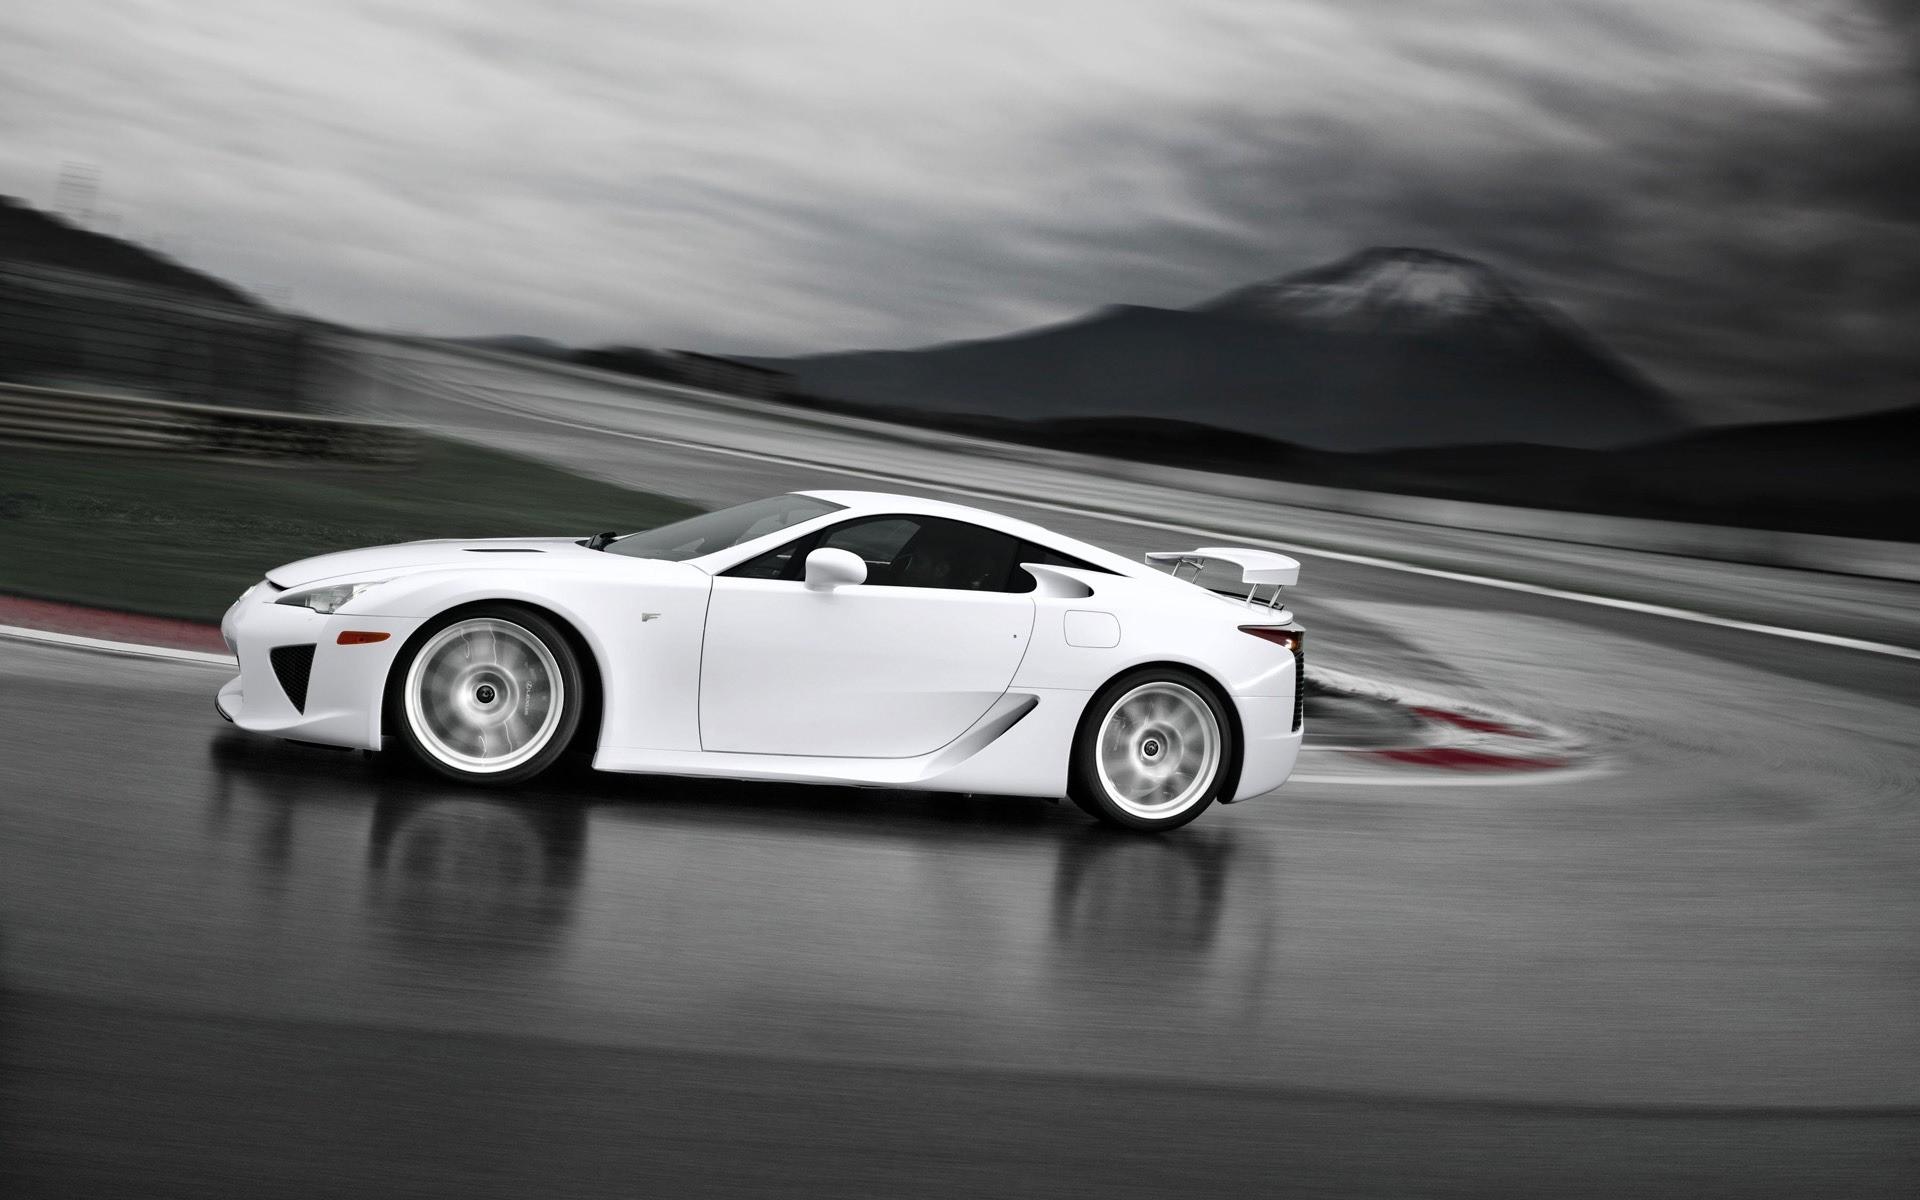 Lexus LFA White Side Angle Speed. Android wallpaper for free